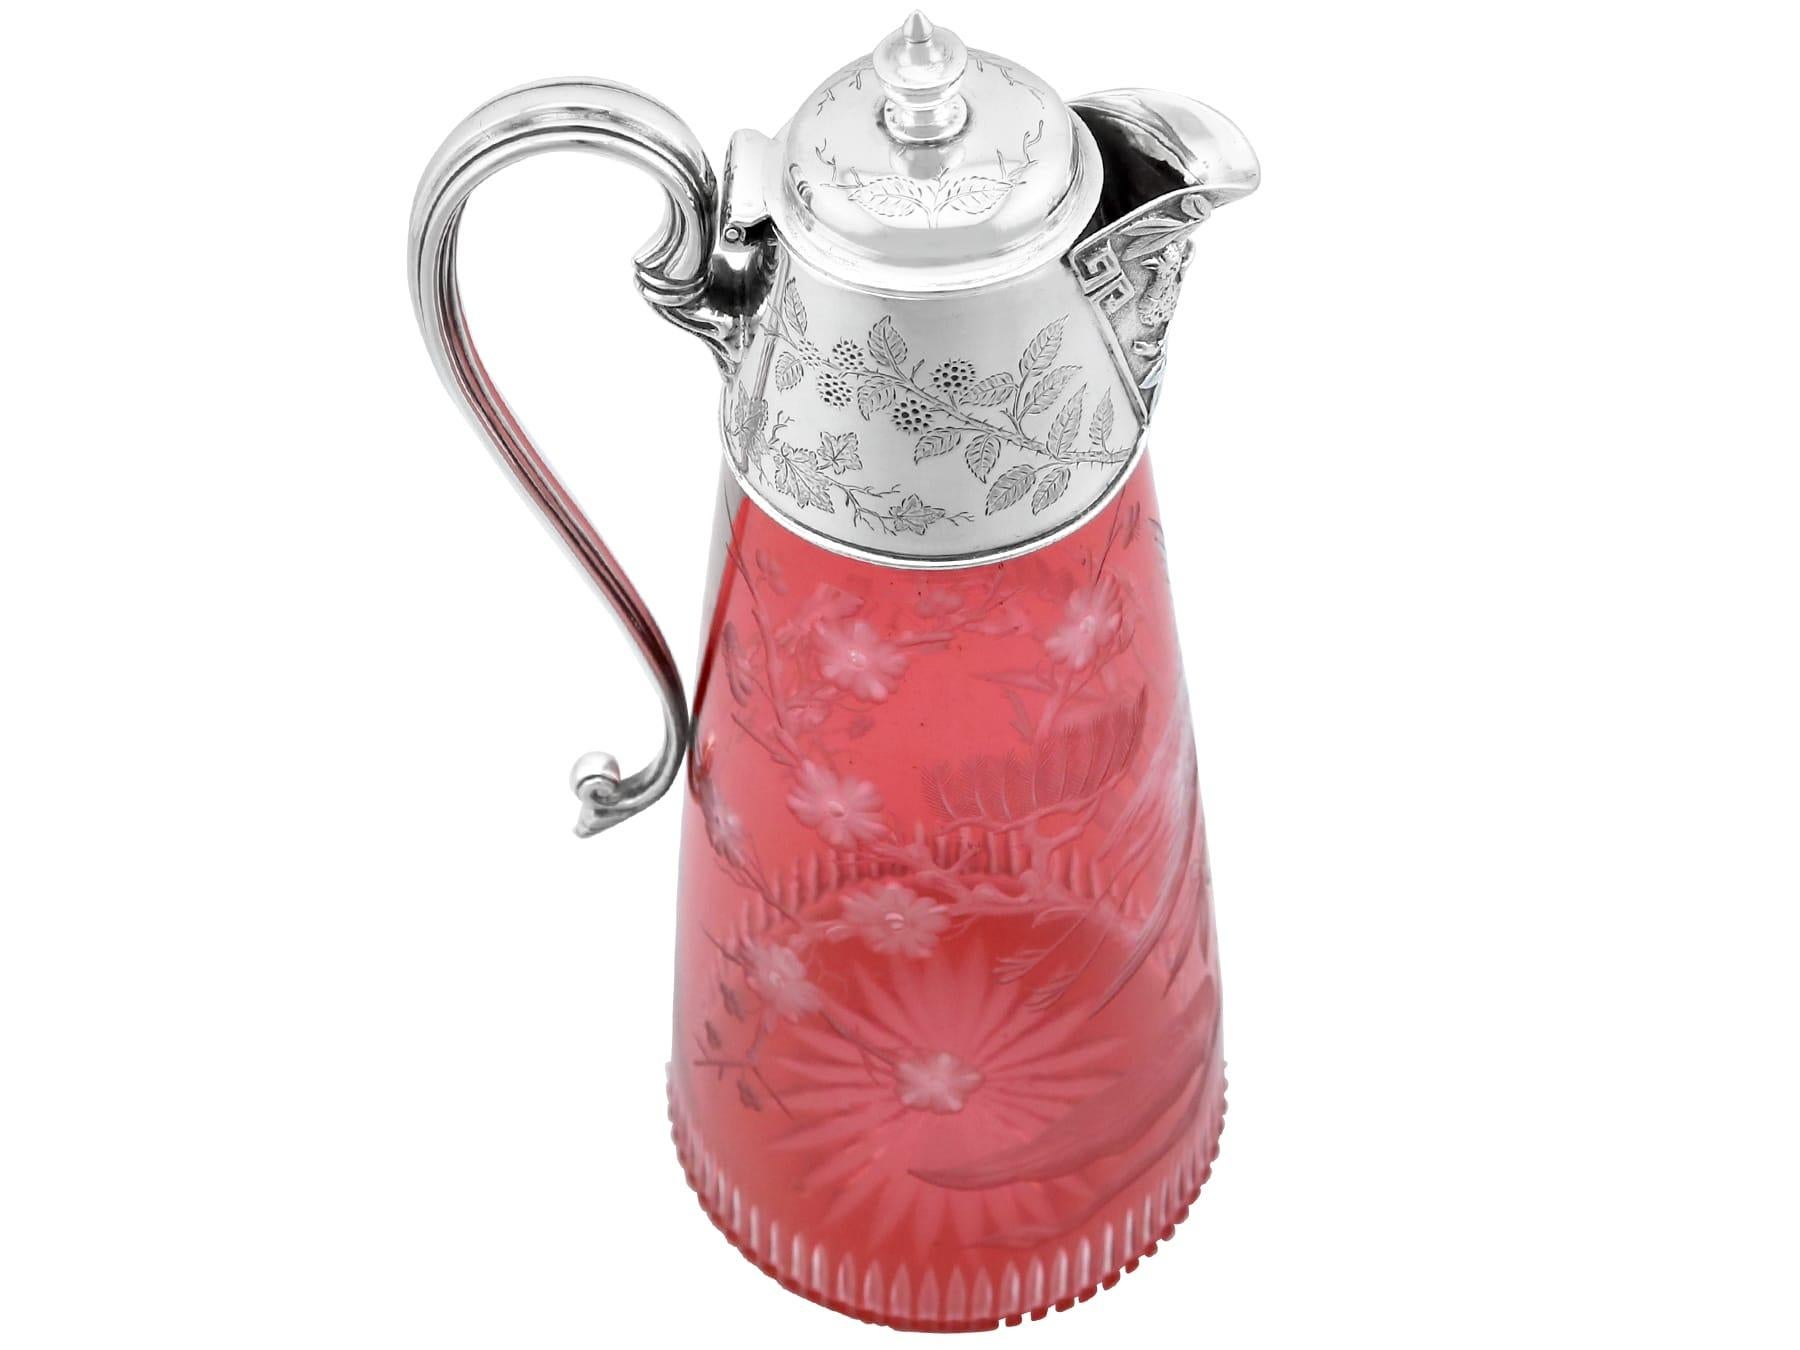 An exceptional, fine and impressive antique Victorian cranberry glass and silver mounted claret jug; part of our silver mounted glass collection

This exceptional antique Victorian sterling silver and glass claret jug has a tapering cylindrical